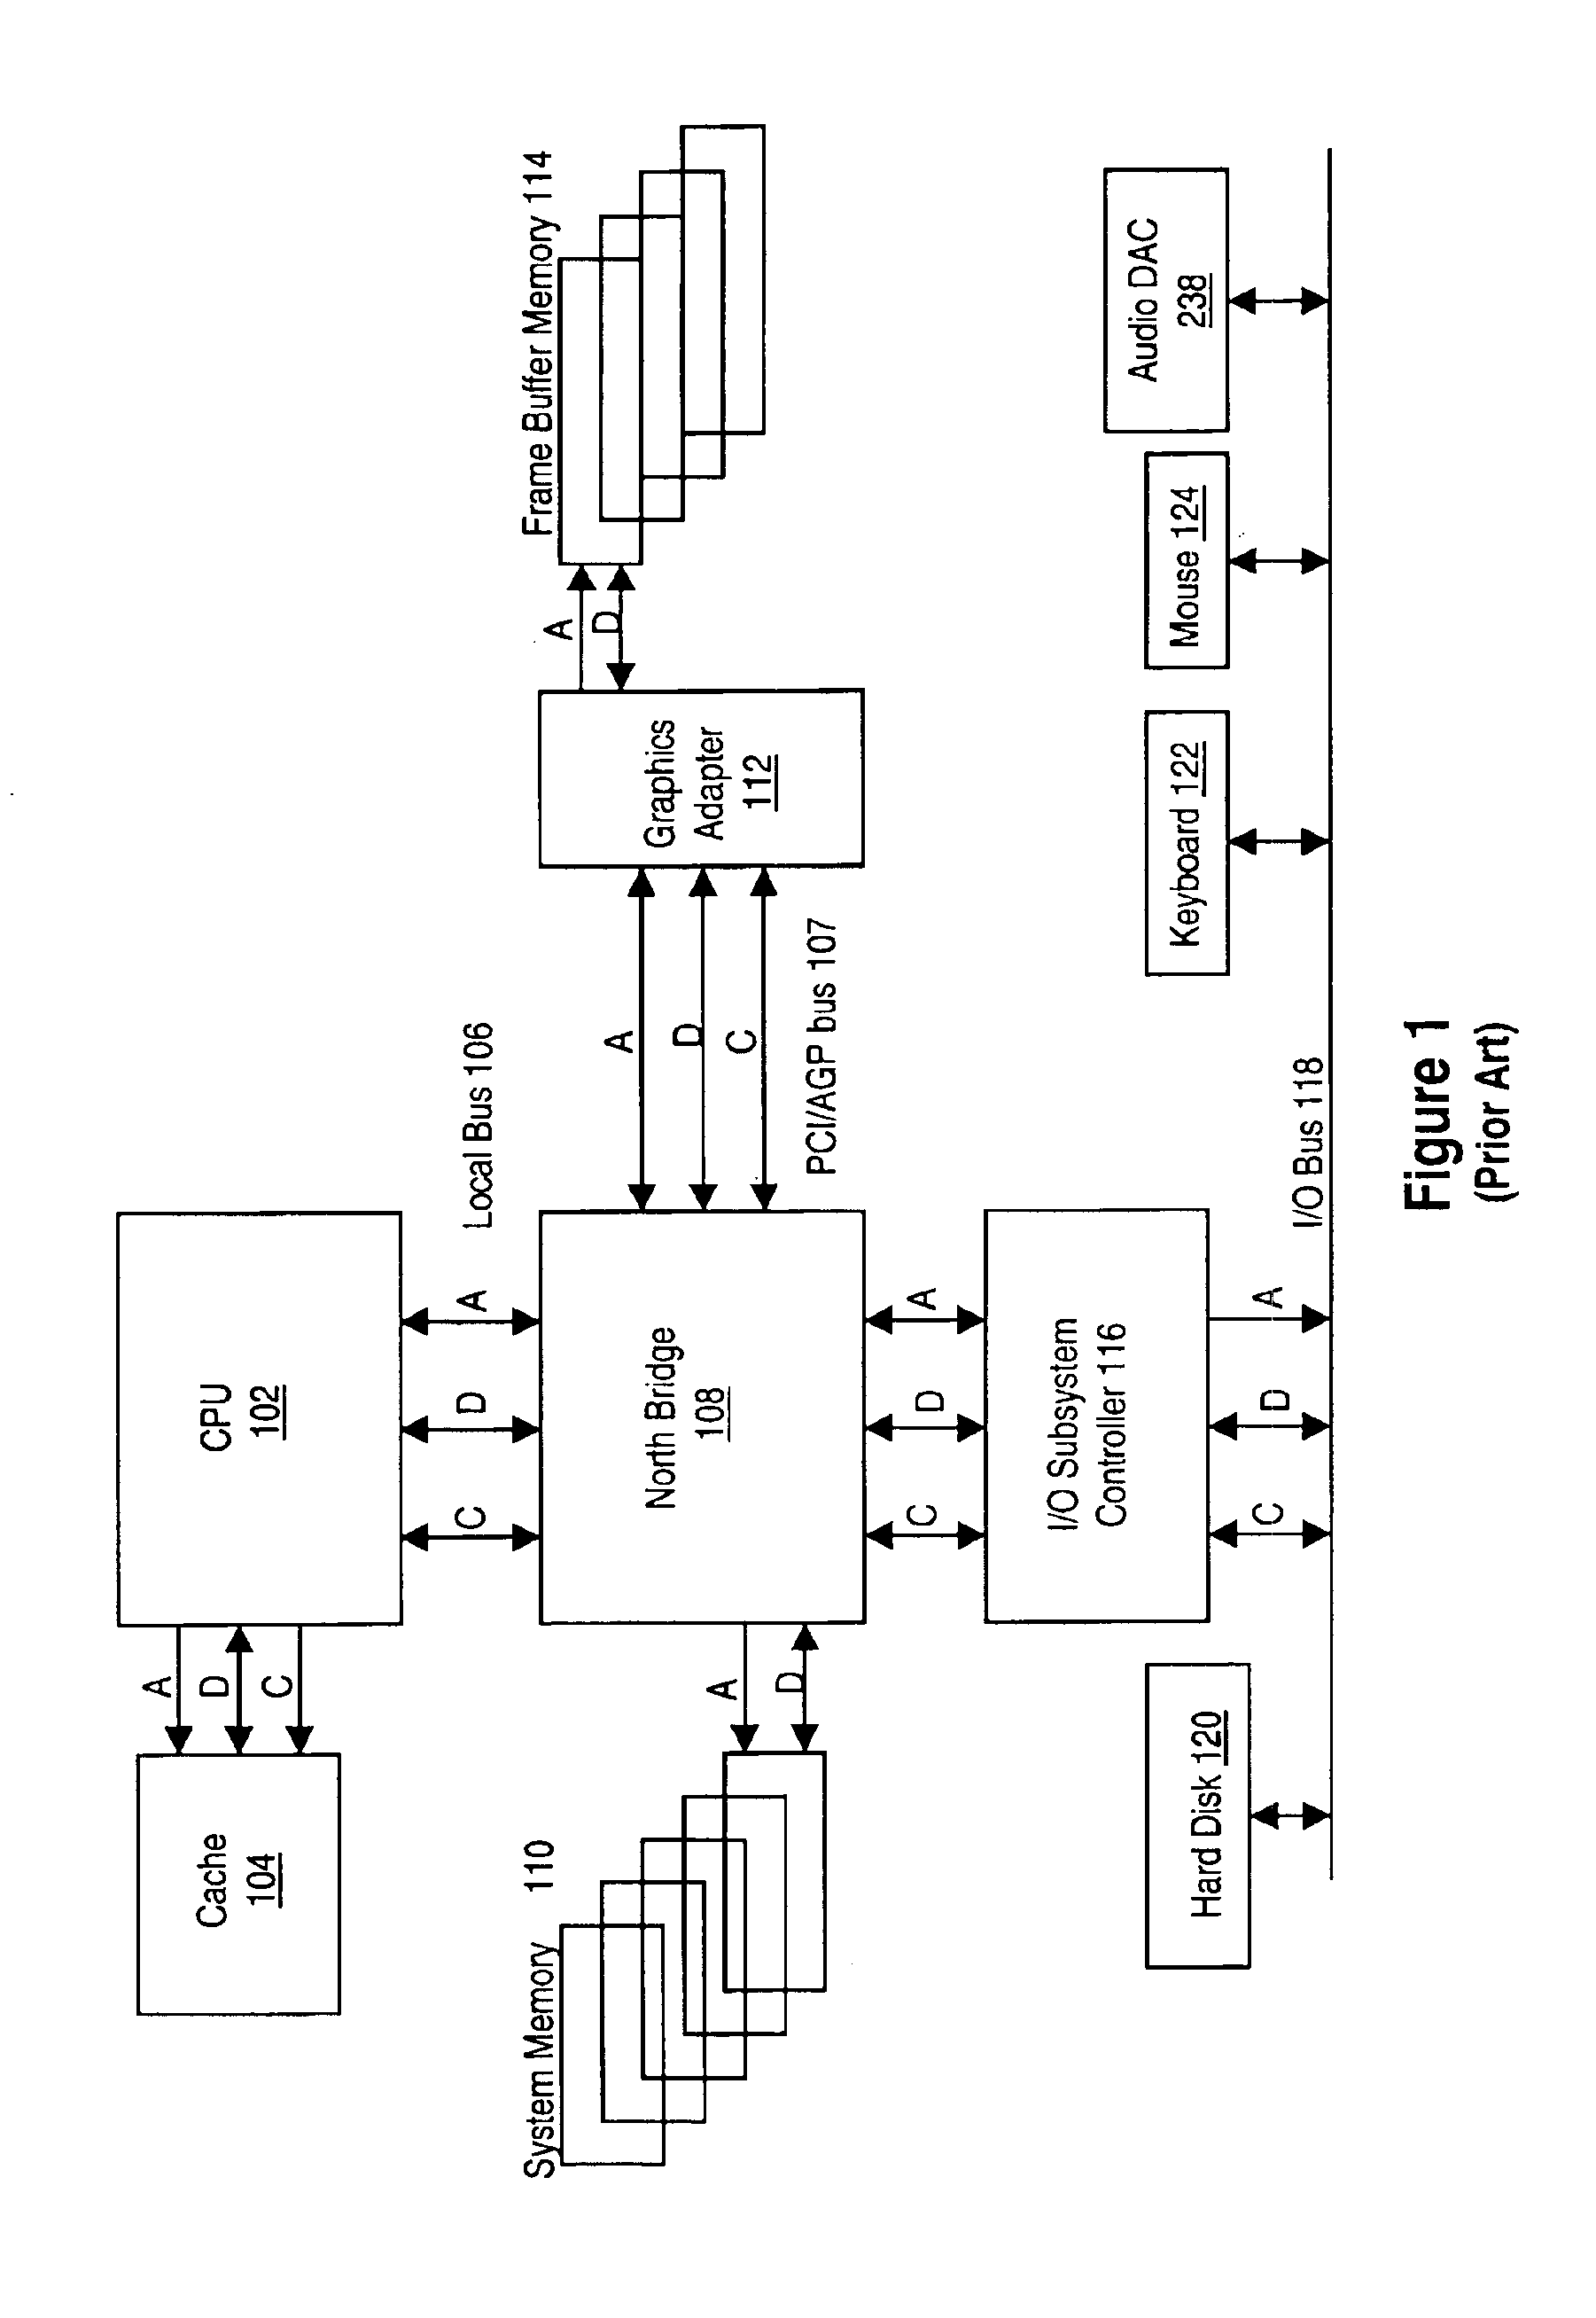 Memory module including scalable embedded parallel data compression and decompression engines